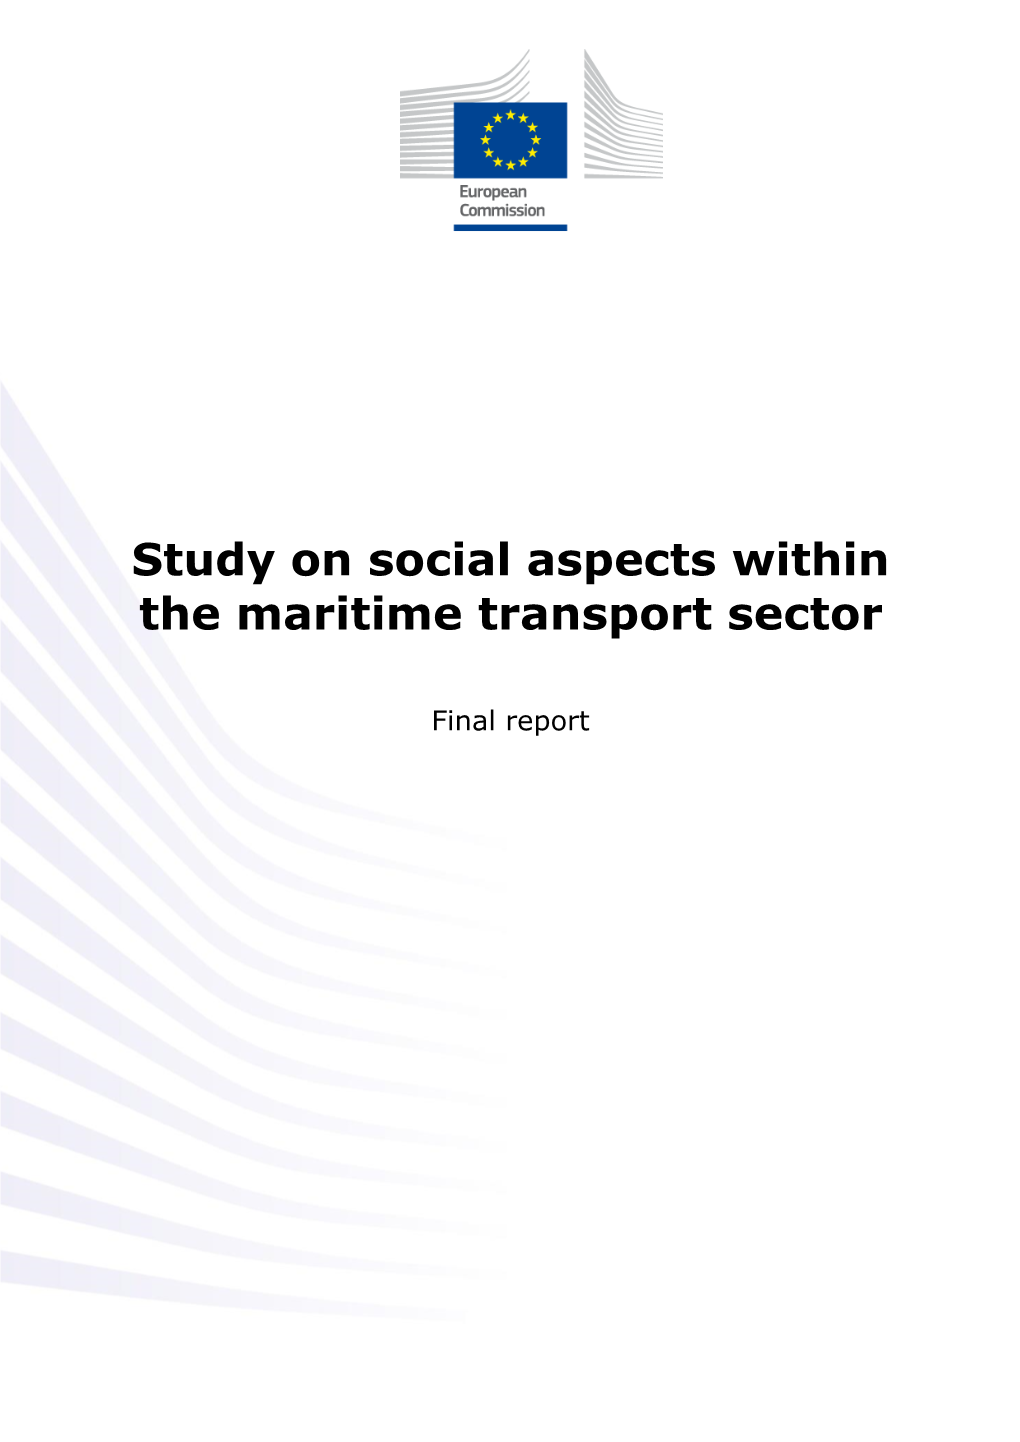 Study on Social Aspects Within the Maritime Transport Sector